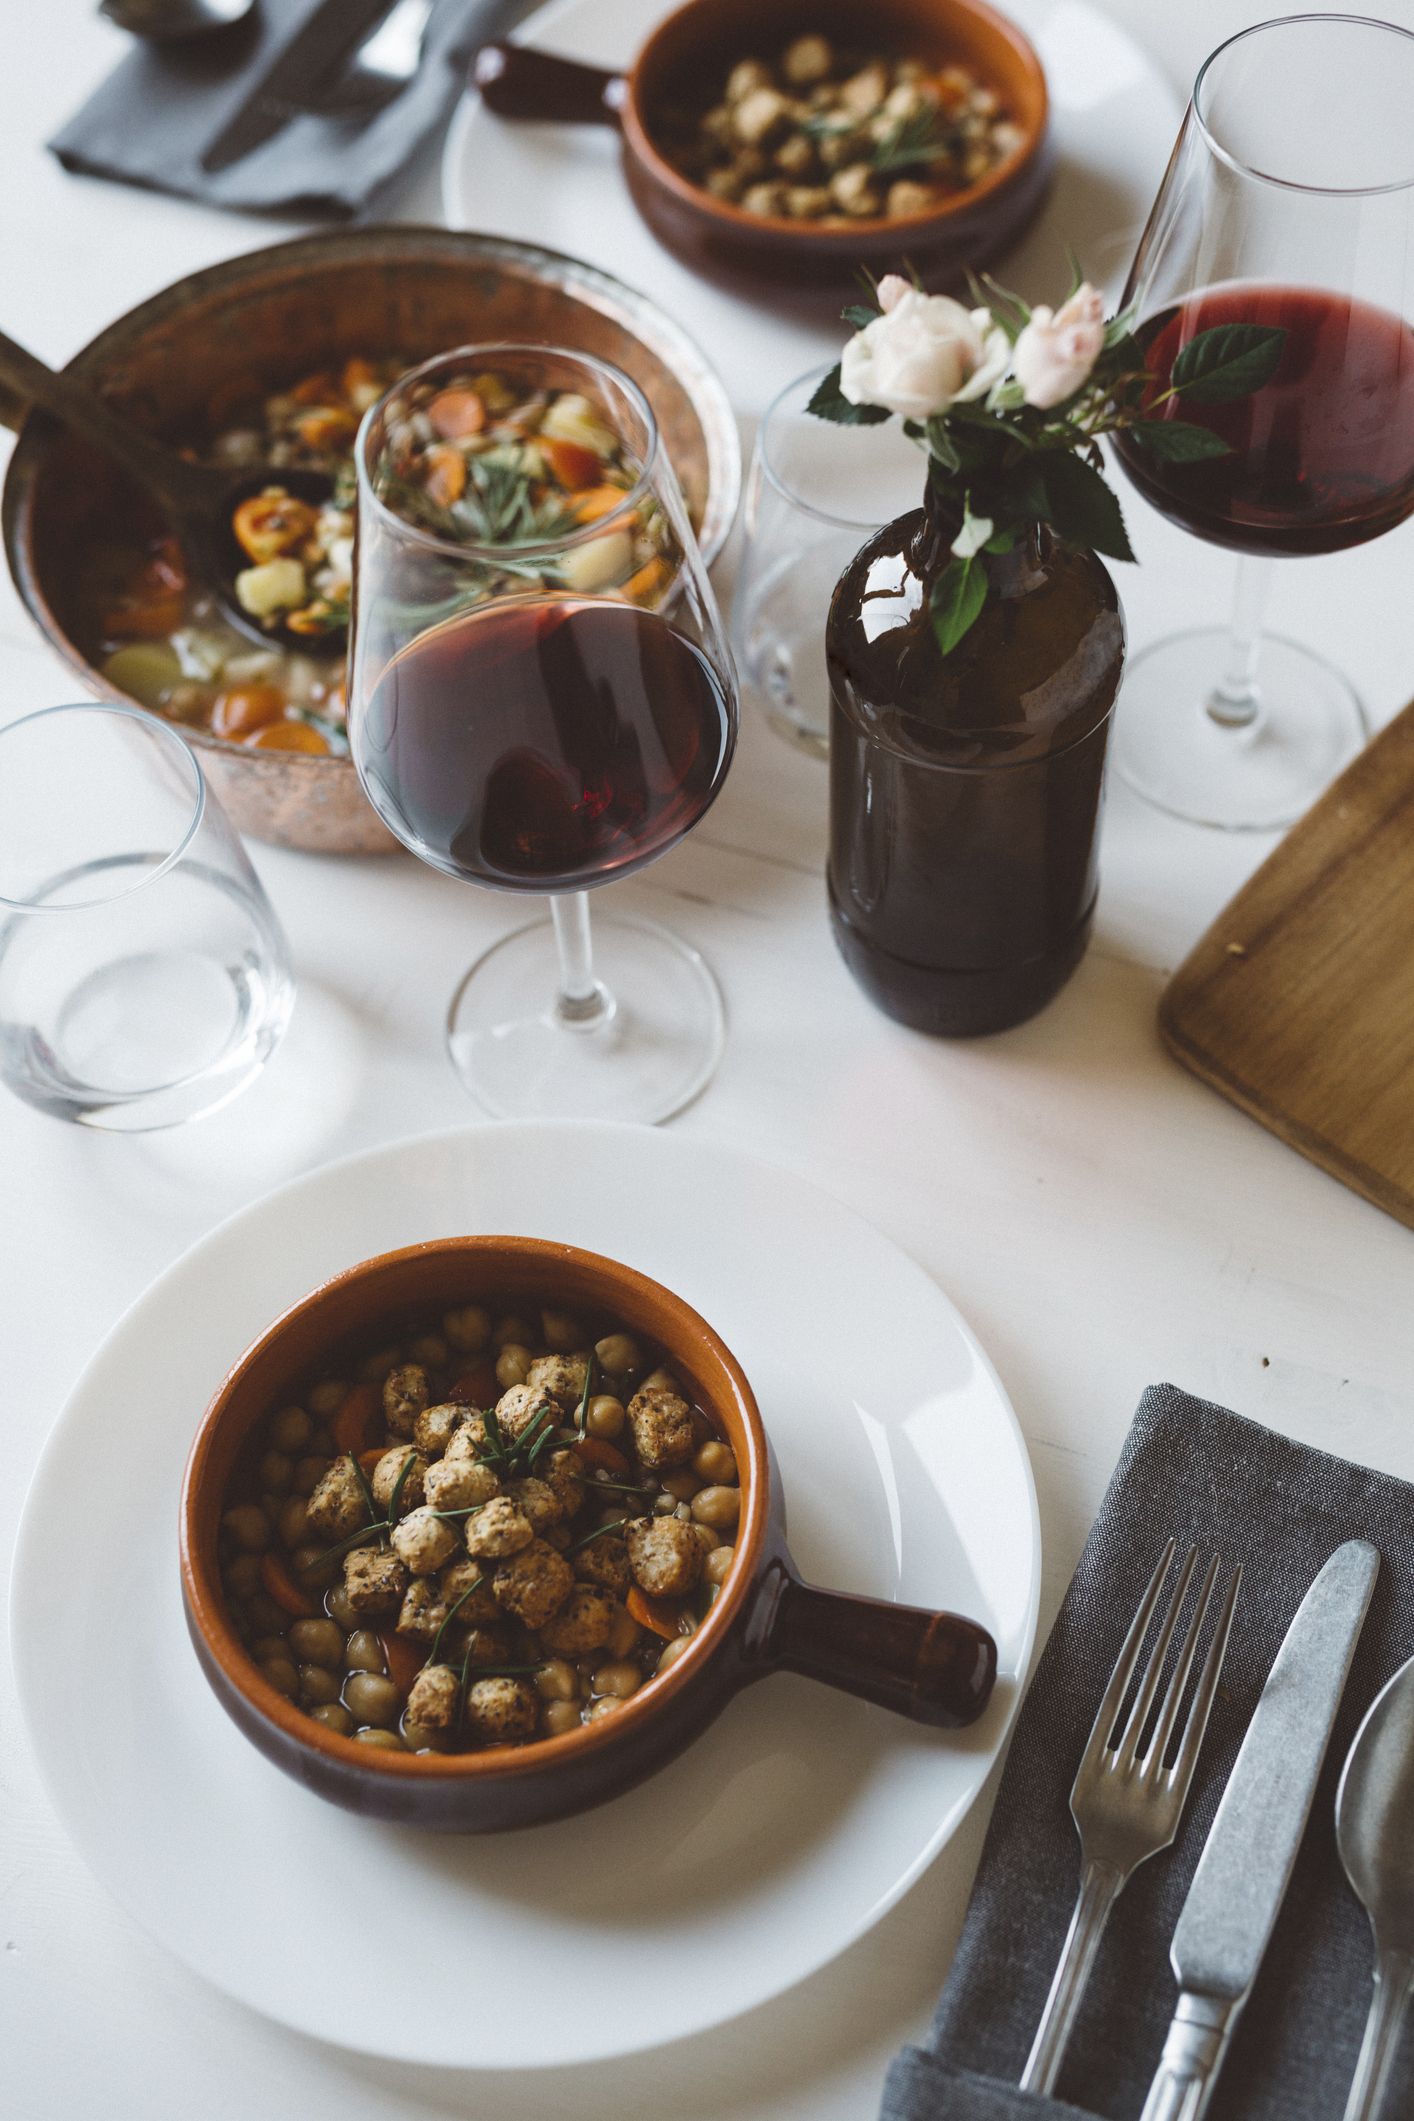 Laid table with Mediterranean soup and red wine